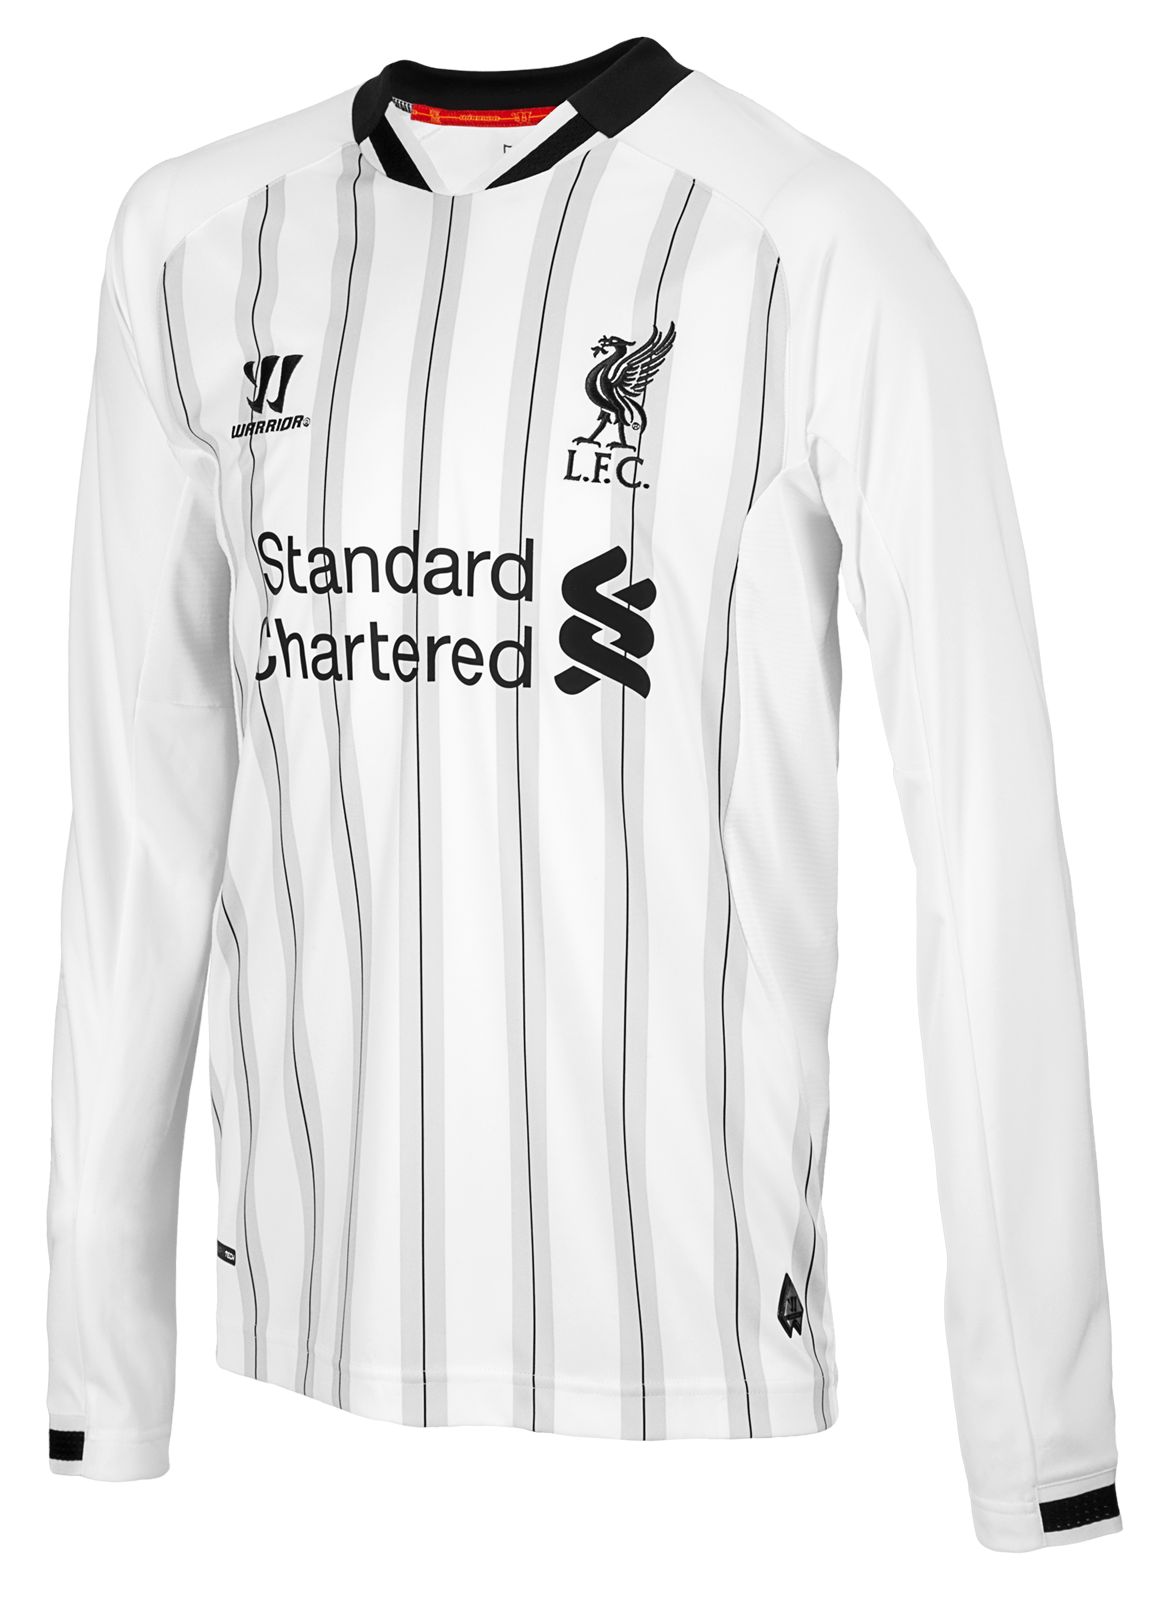 Liverpool Home Jr. Goal Keeper LS Jersey 2013/14, White with Anthracite image number 1